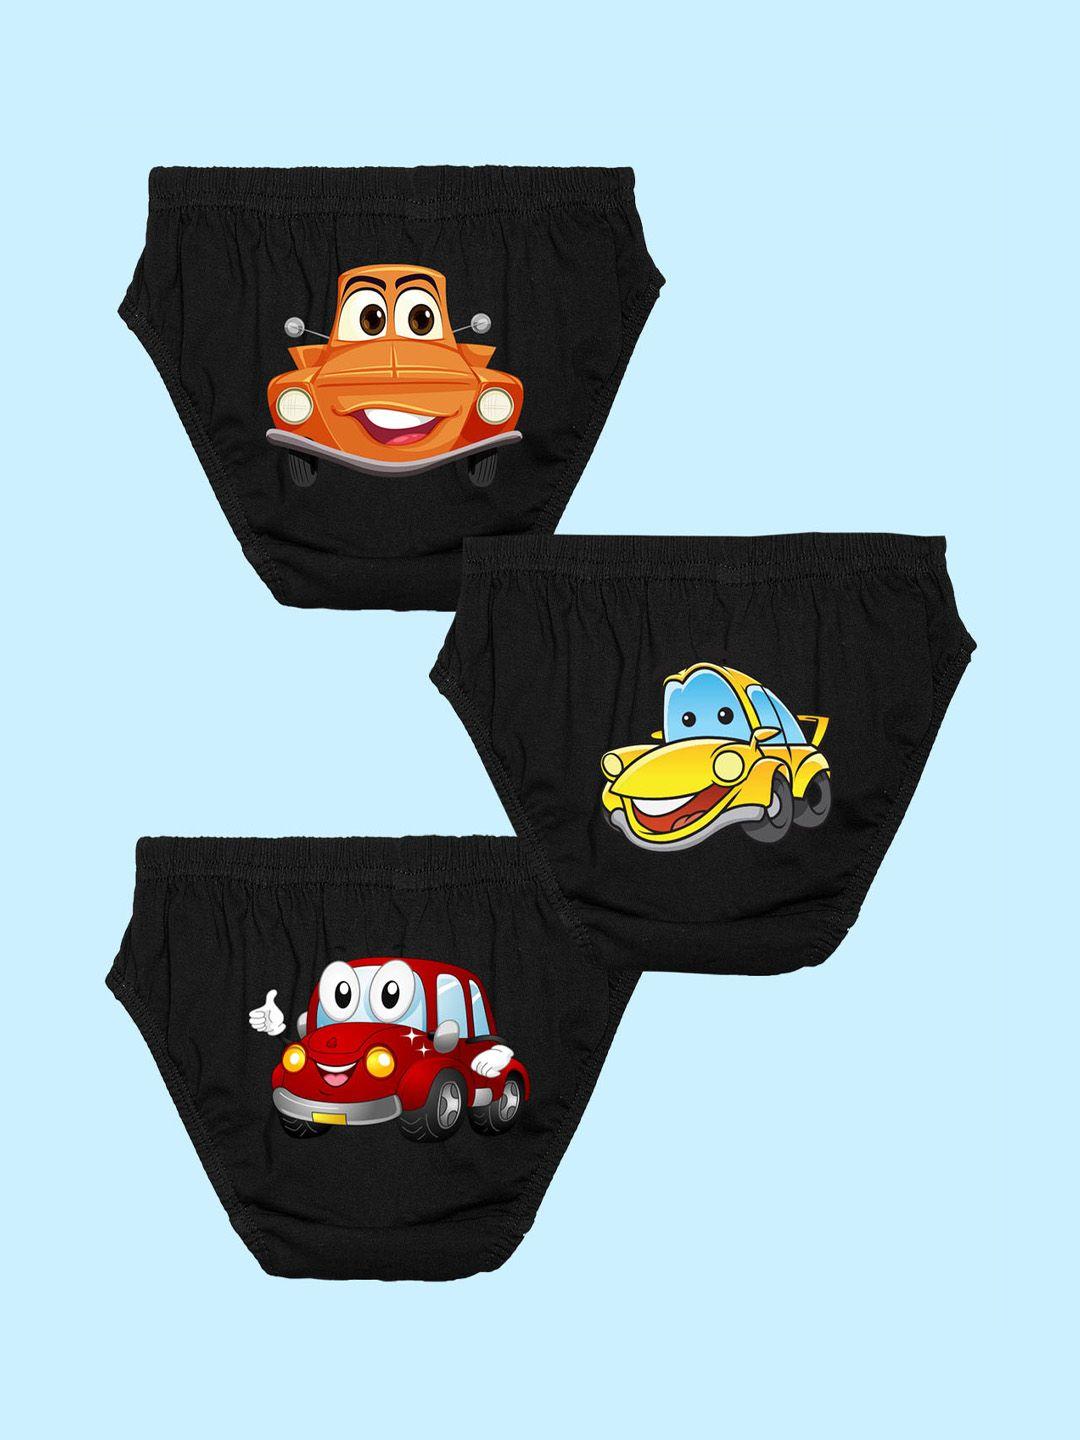 nusyl boys pack of 3 printed pure cotton mid rise basicbriefs nubcbrfpo3.0107